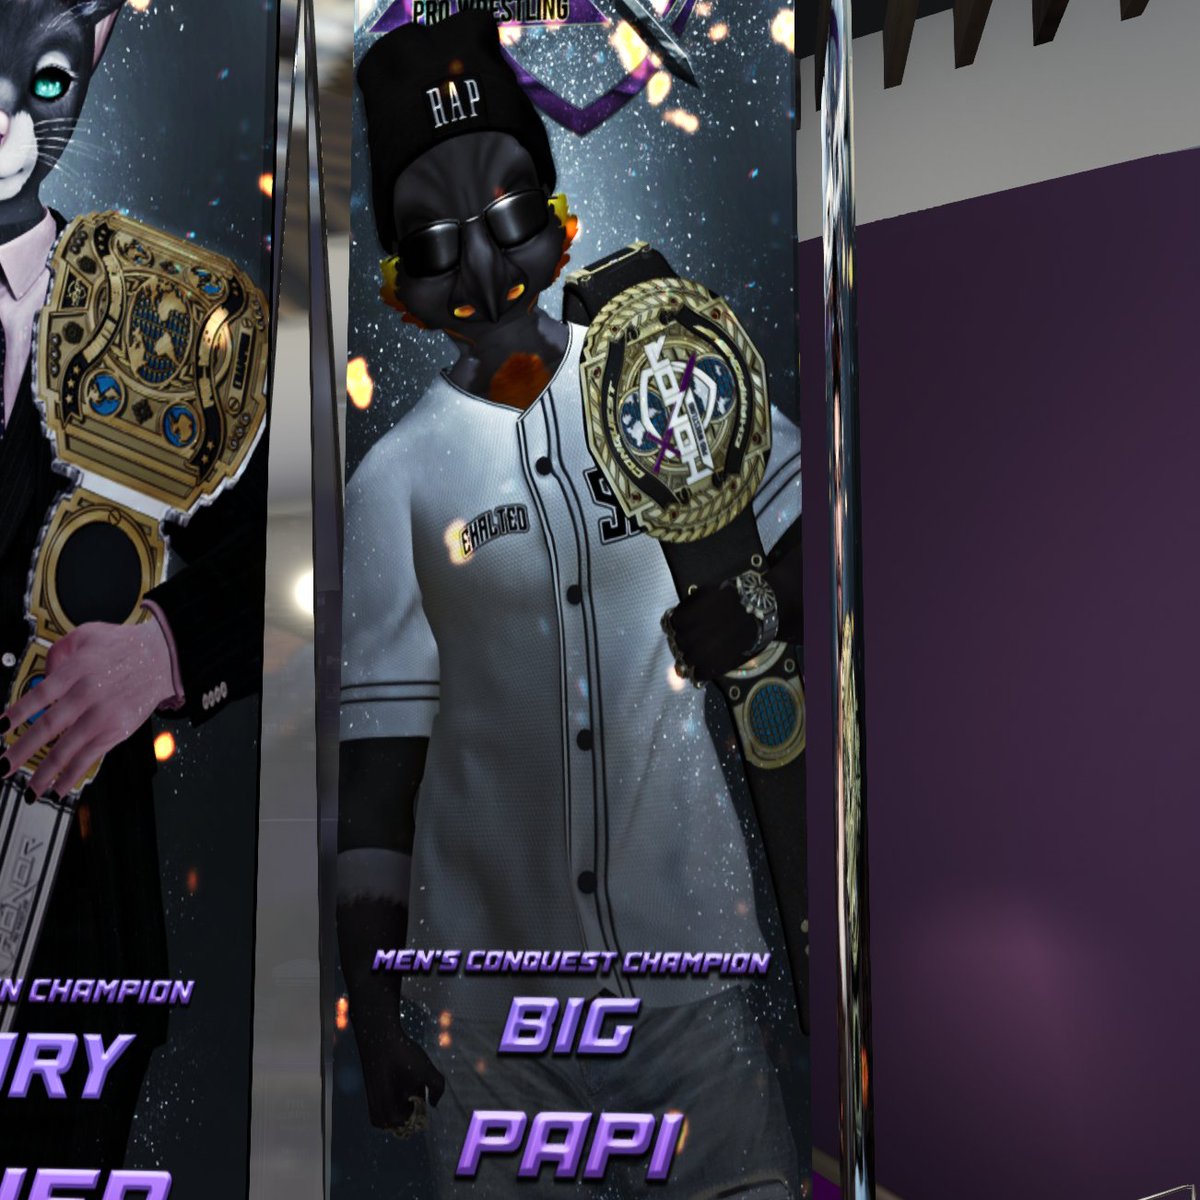 GOOD MORNING @HonorPro_SL! IT IS I.... YOUR MEN'S CONQUEST CHAMPION!!! DAY 11 BABY AND WE GOT OUR BANNER!!!!!!

EVERYONE SHOULD PRAISE OUR TEAM FOR THEIR HARD WORK AT TAKING THE PERFECT PIC OF YA BOI!!!

#CANTSTOPWONTSTOP #ANDSTILL #CHAMPIONPENGUINO